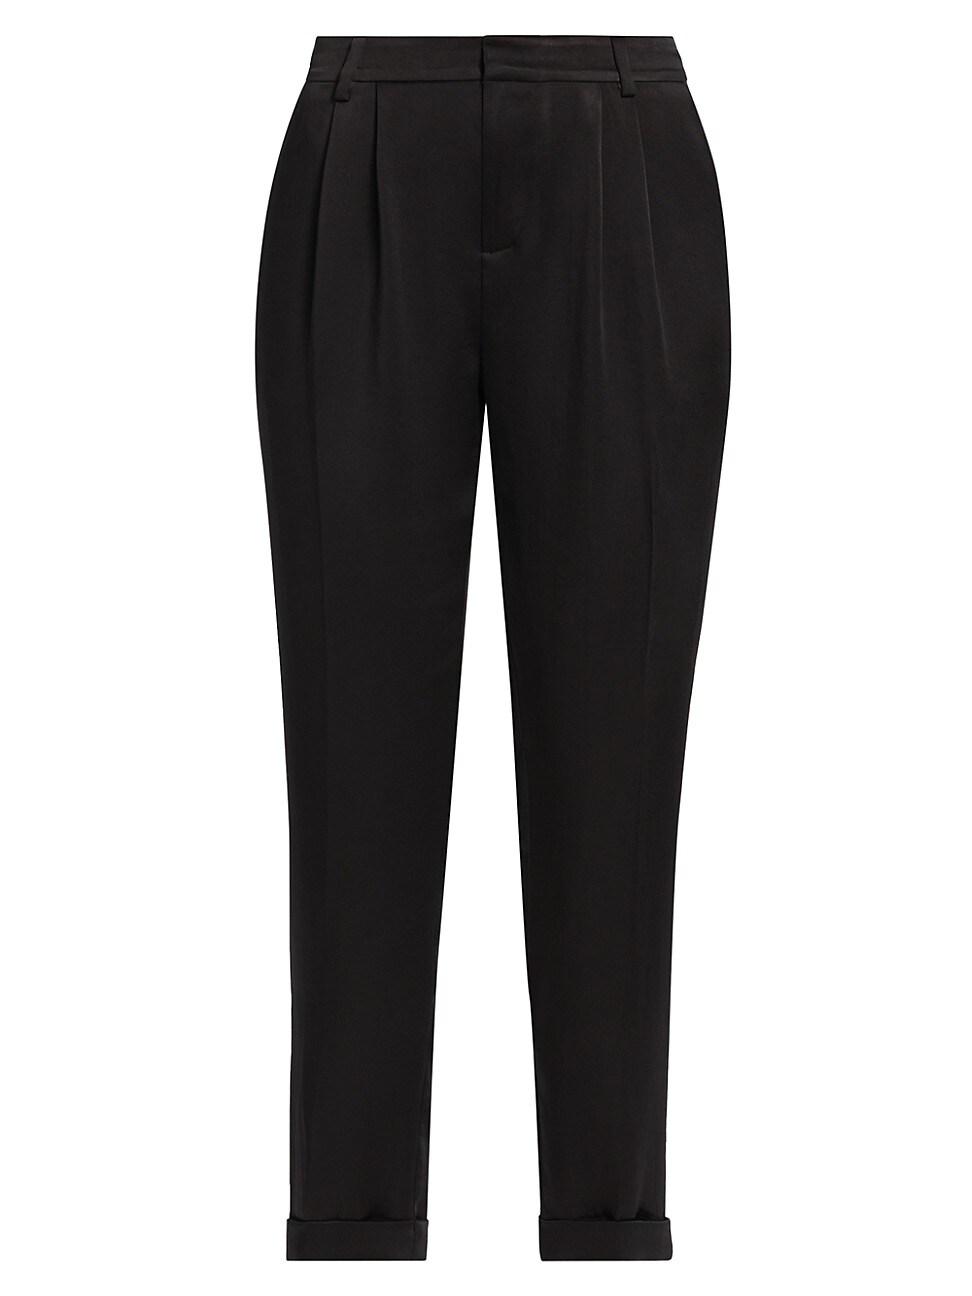 Ramy Brook Madelyn Cropped Satin Pants in Black | Lyst